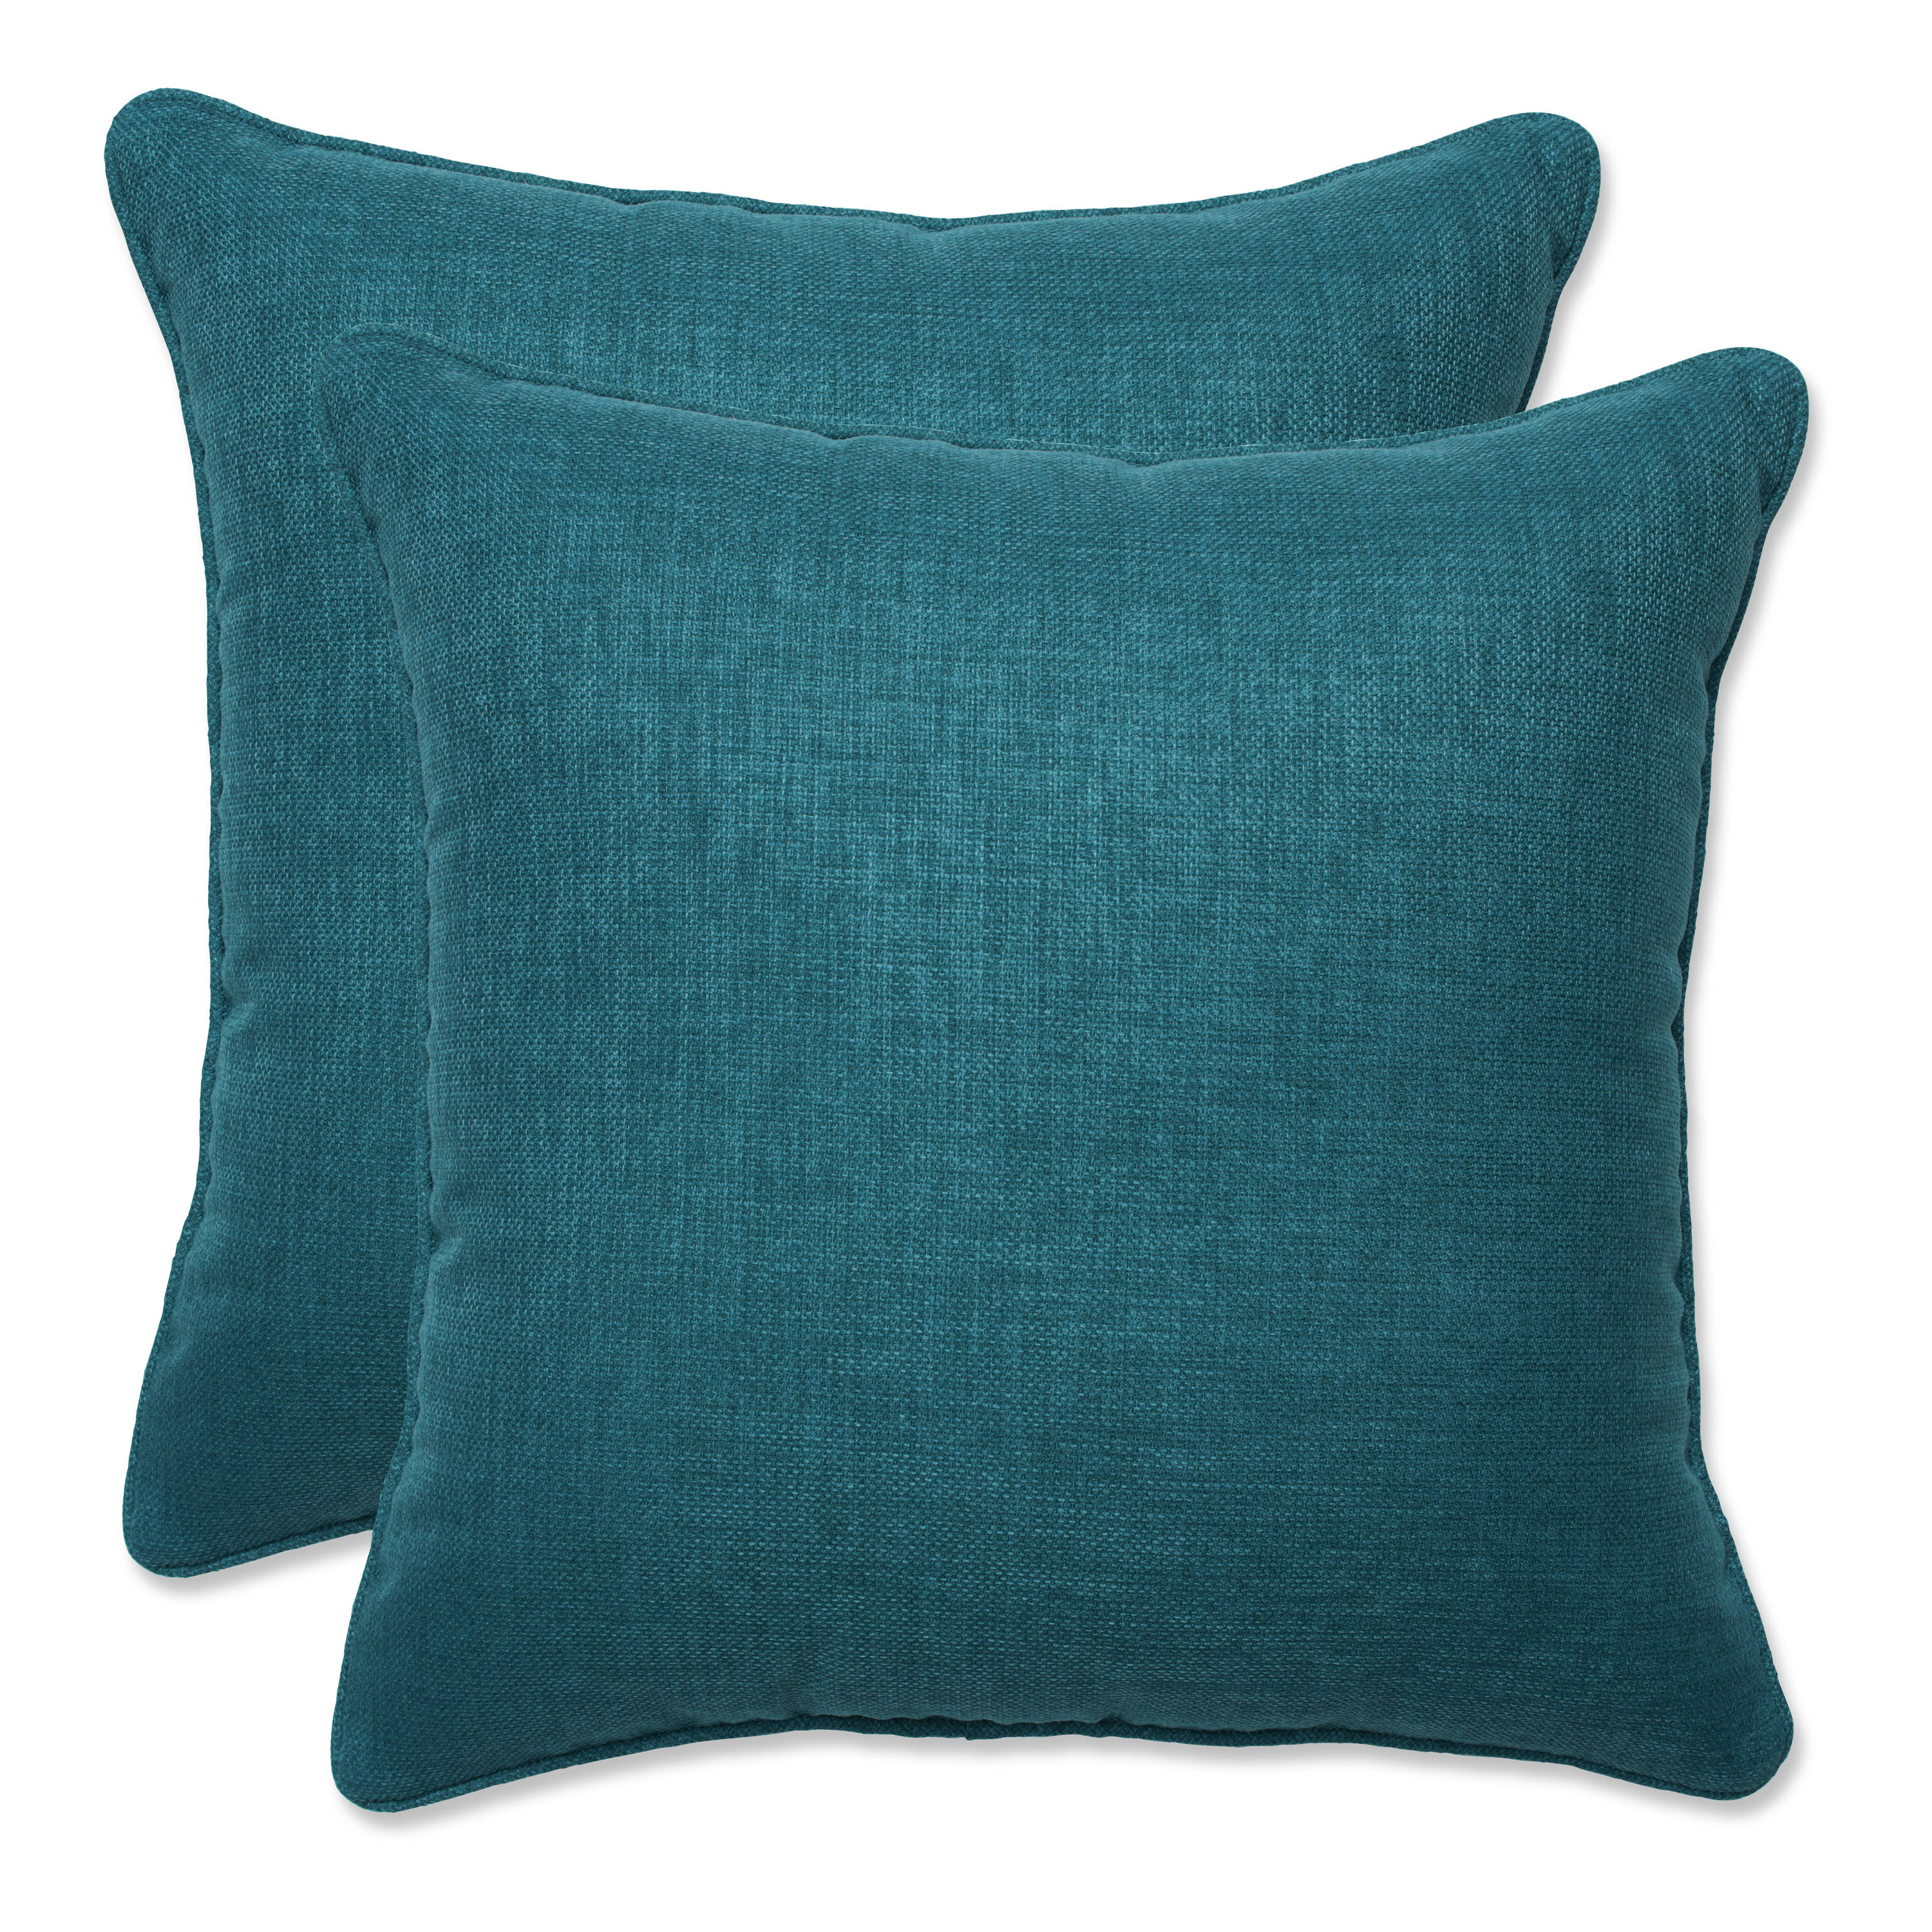 Outdoor Pillows - Piped - 22 in. Square - Oyster